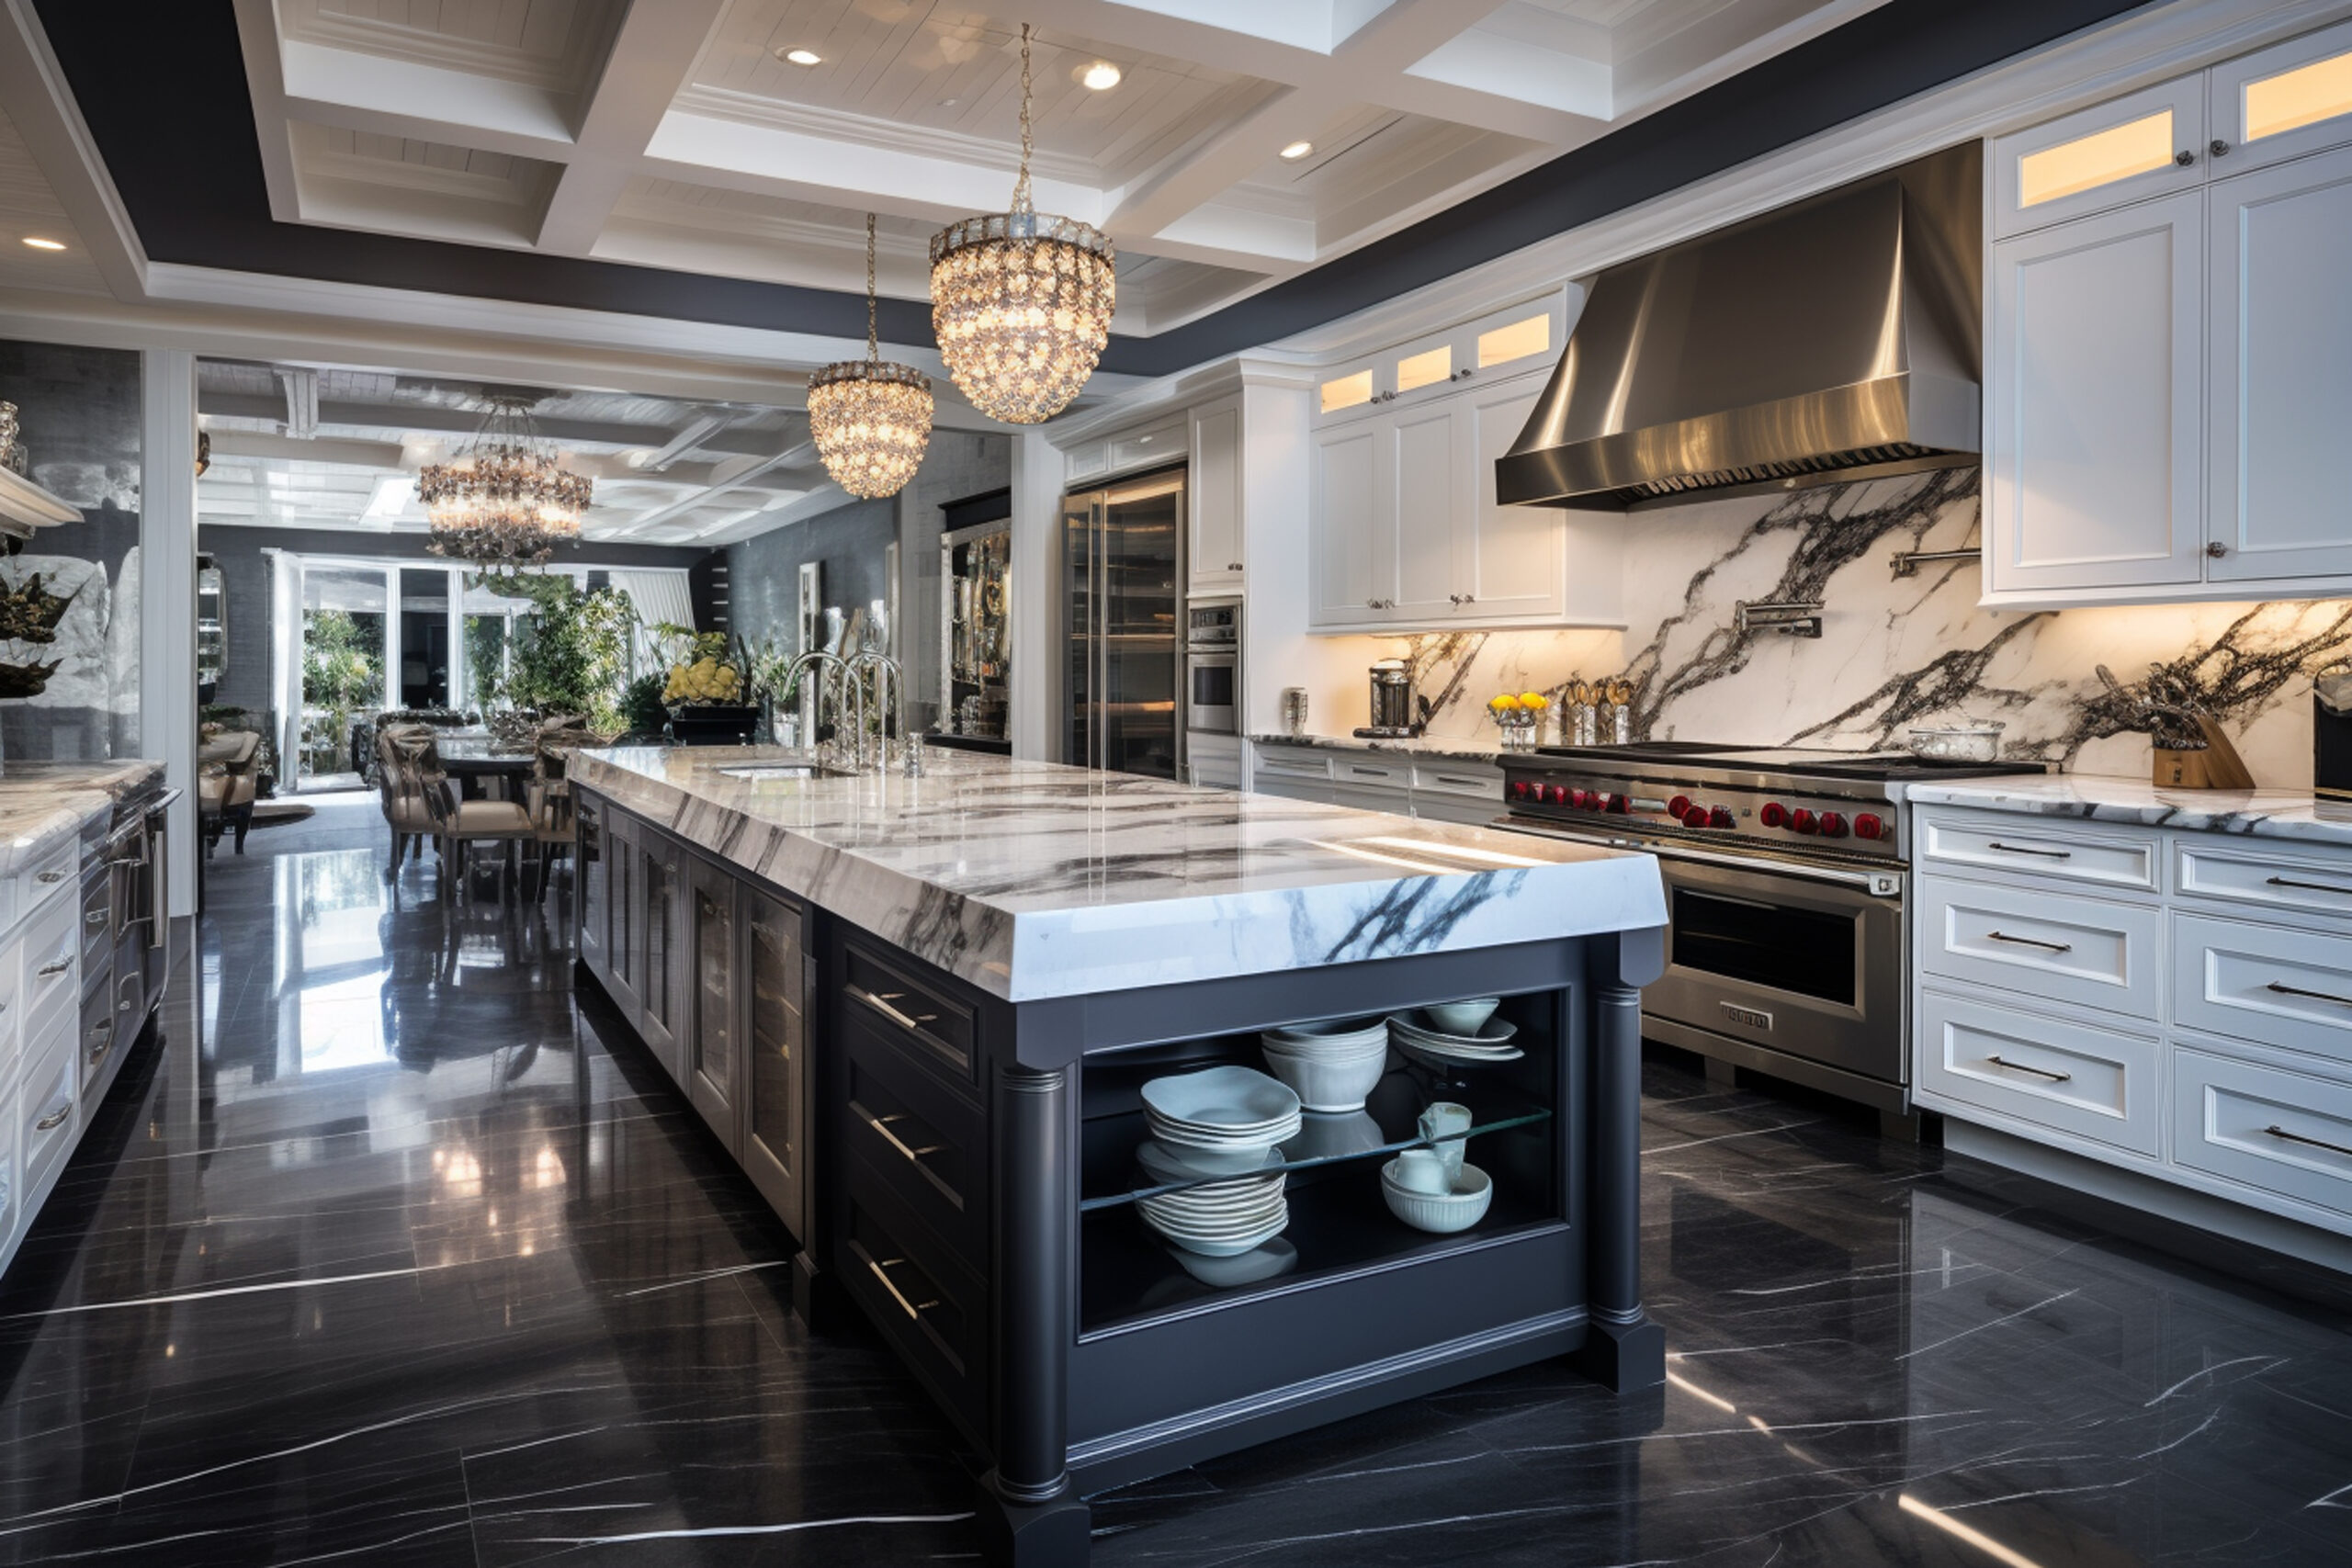 Make Sure Your Custom Kitchen Design Fits Your Style